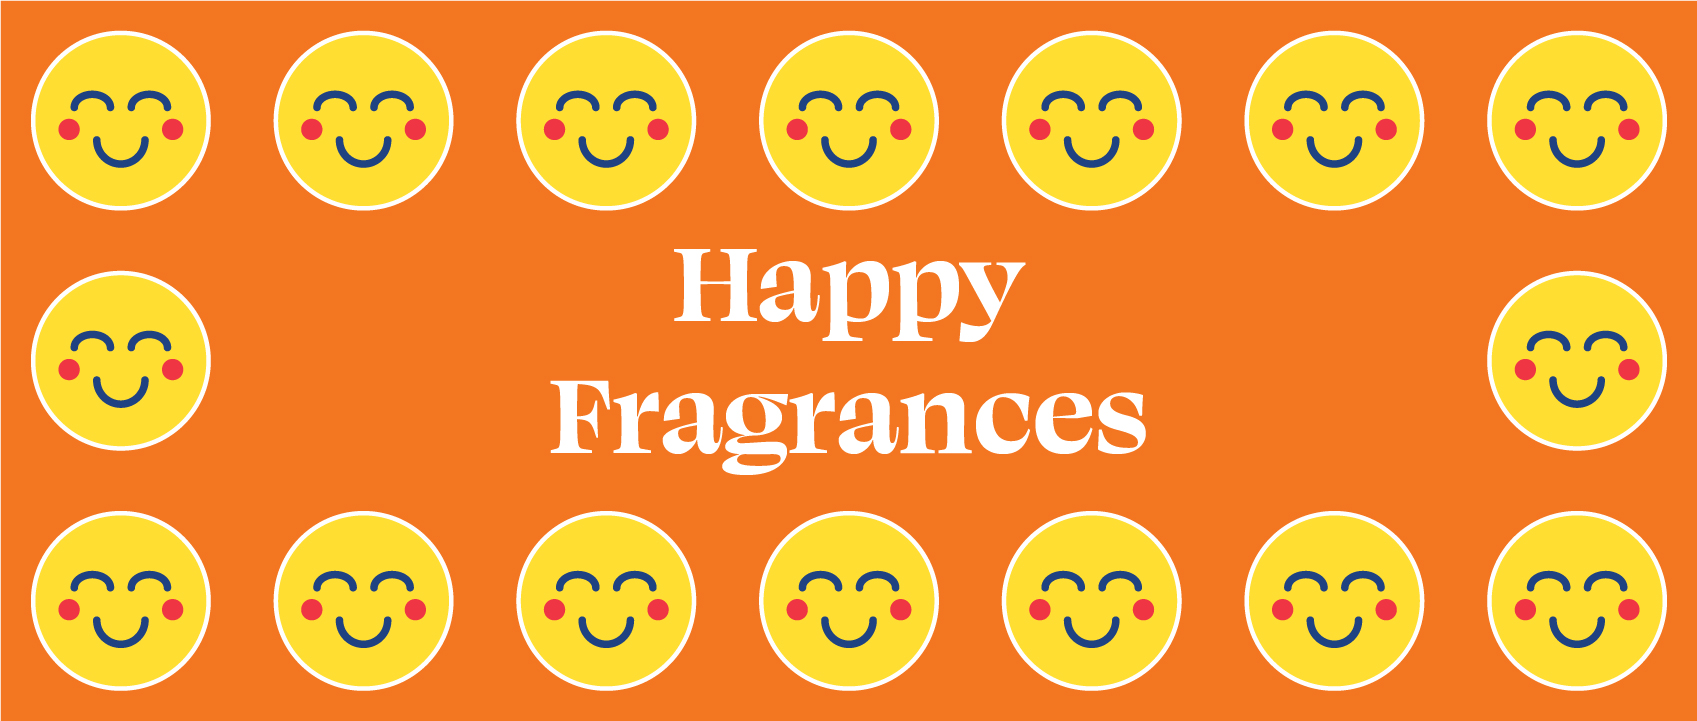 happy fragrances with smiley faces